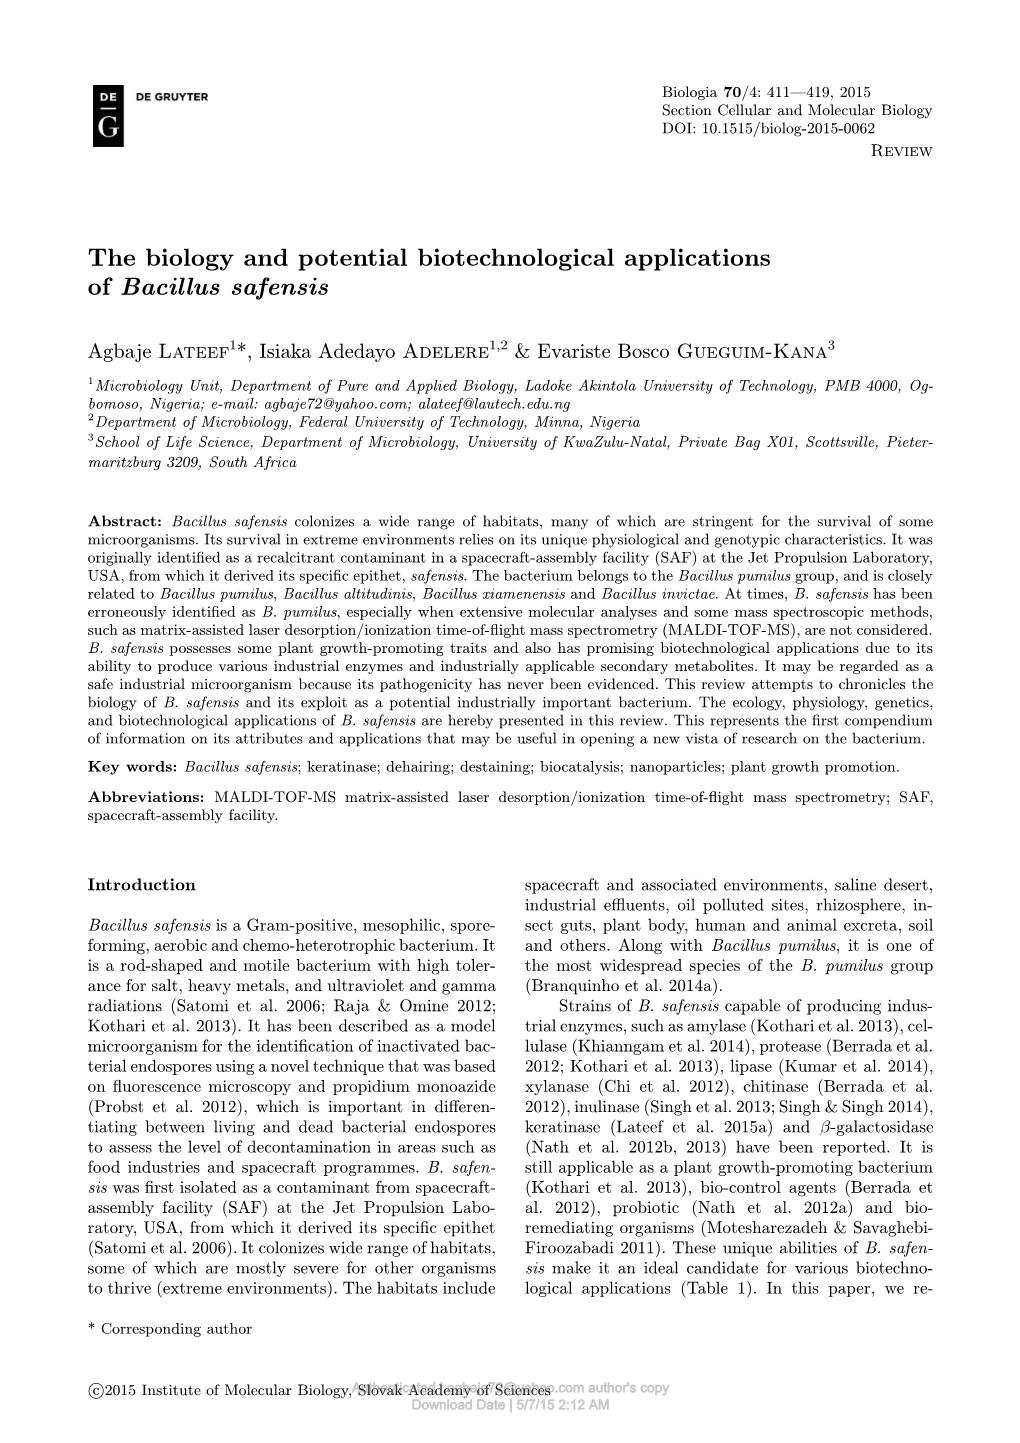 The Biology and Potential Biotechnological Applications of Bacillus Safensis